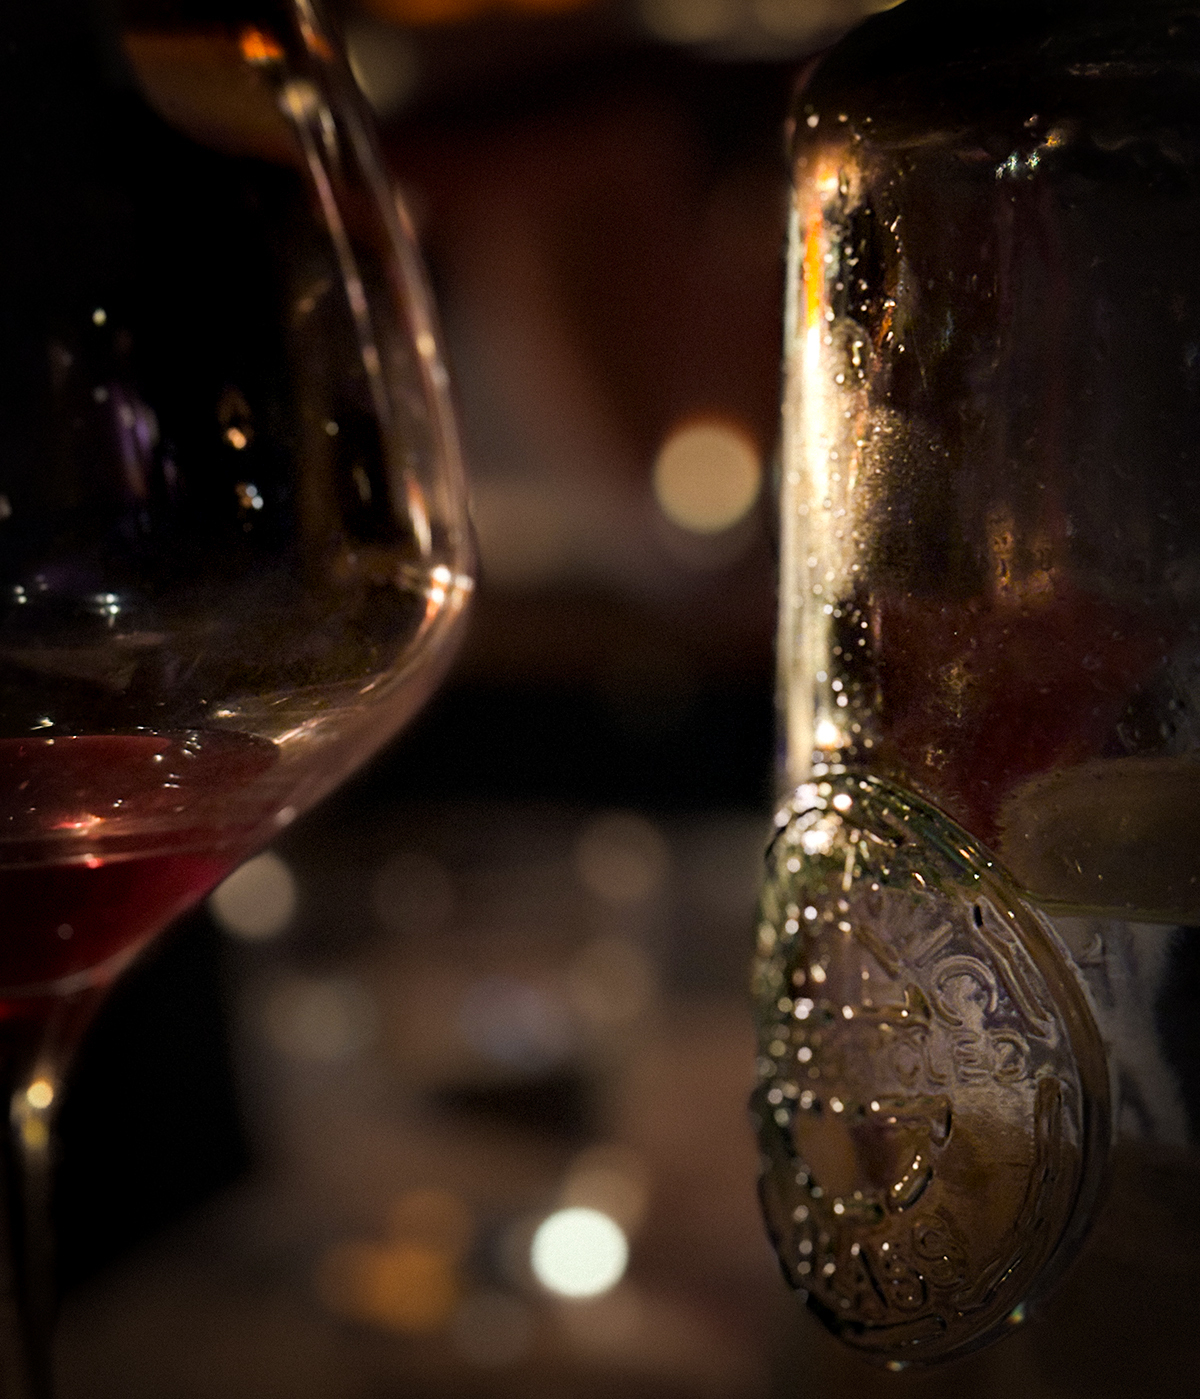 A close-up view showcasing a wine glass with red wine alongside a drink in a glass jar in a dimly lit room.